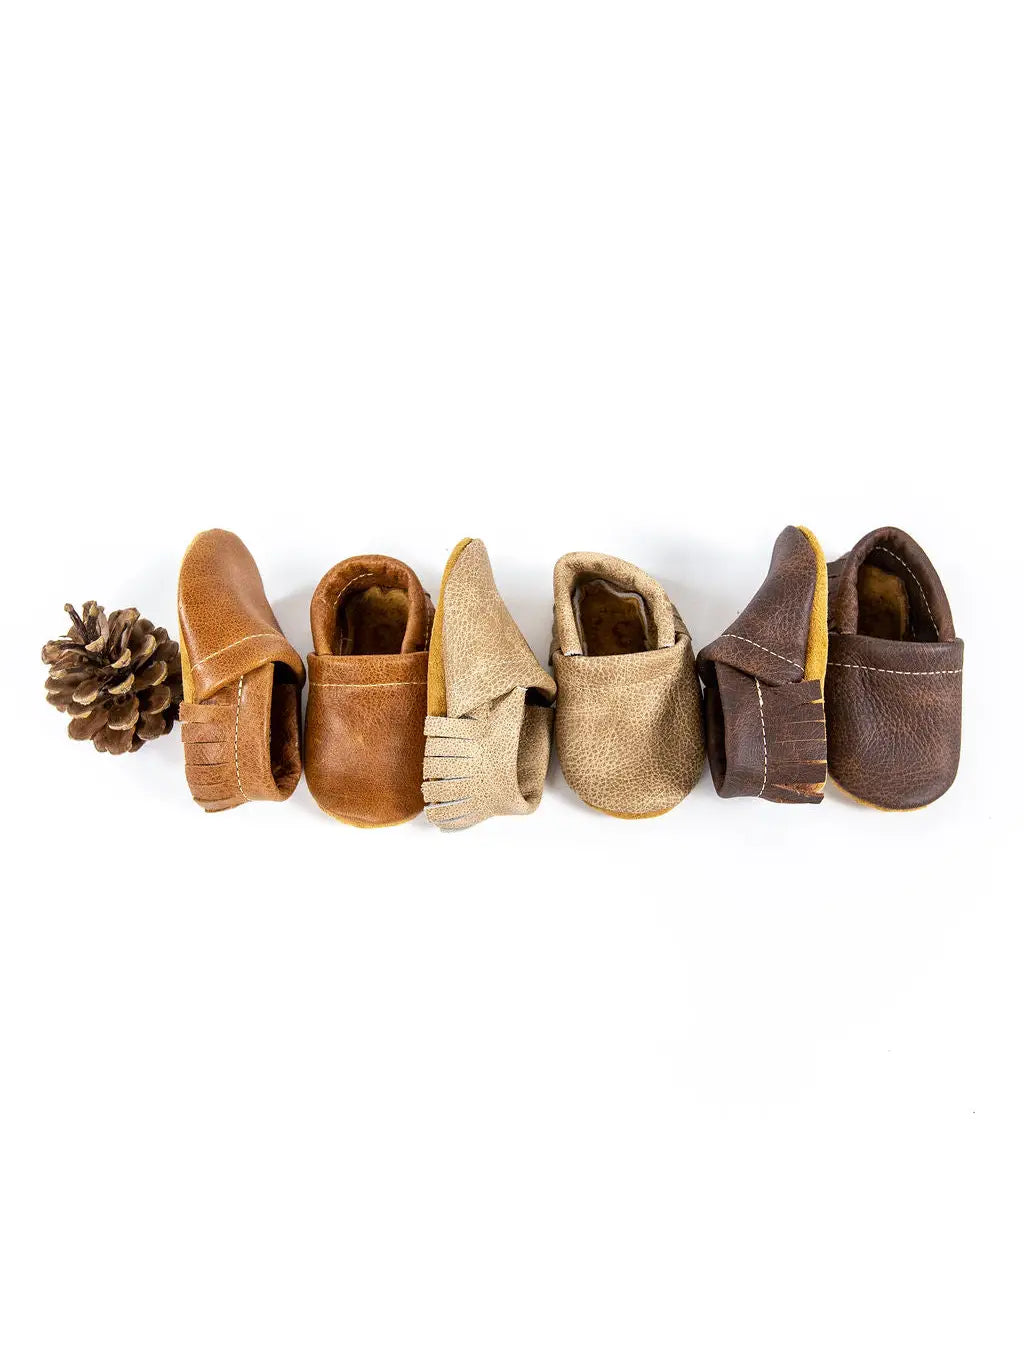 Moccasins Leather Baby Shoes & Toddler